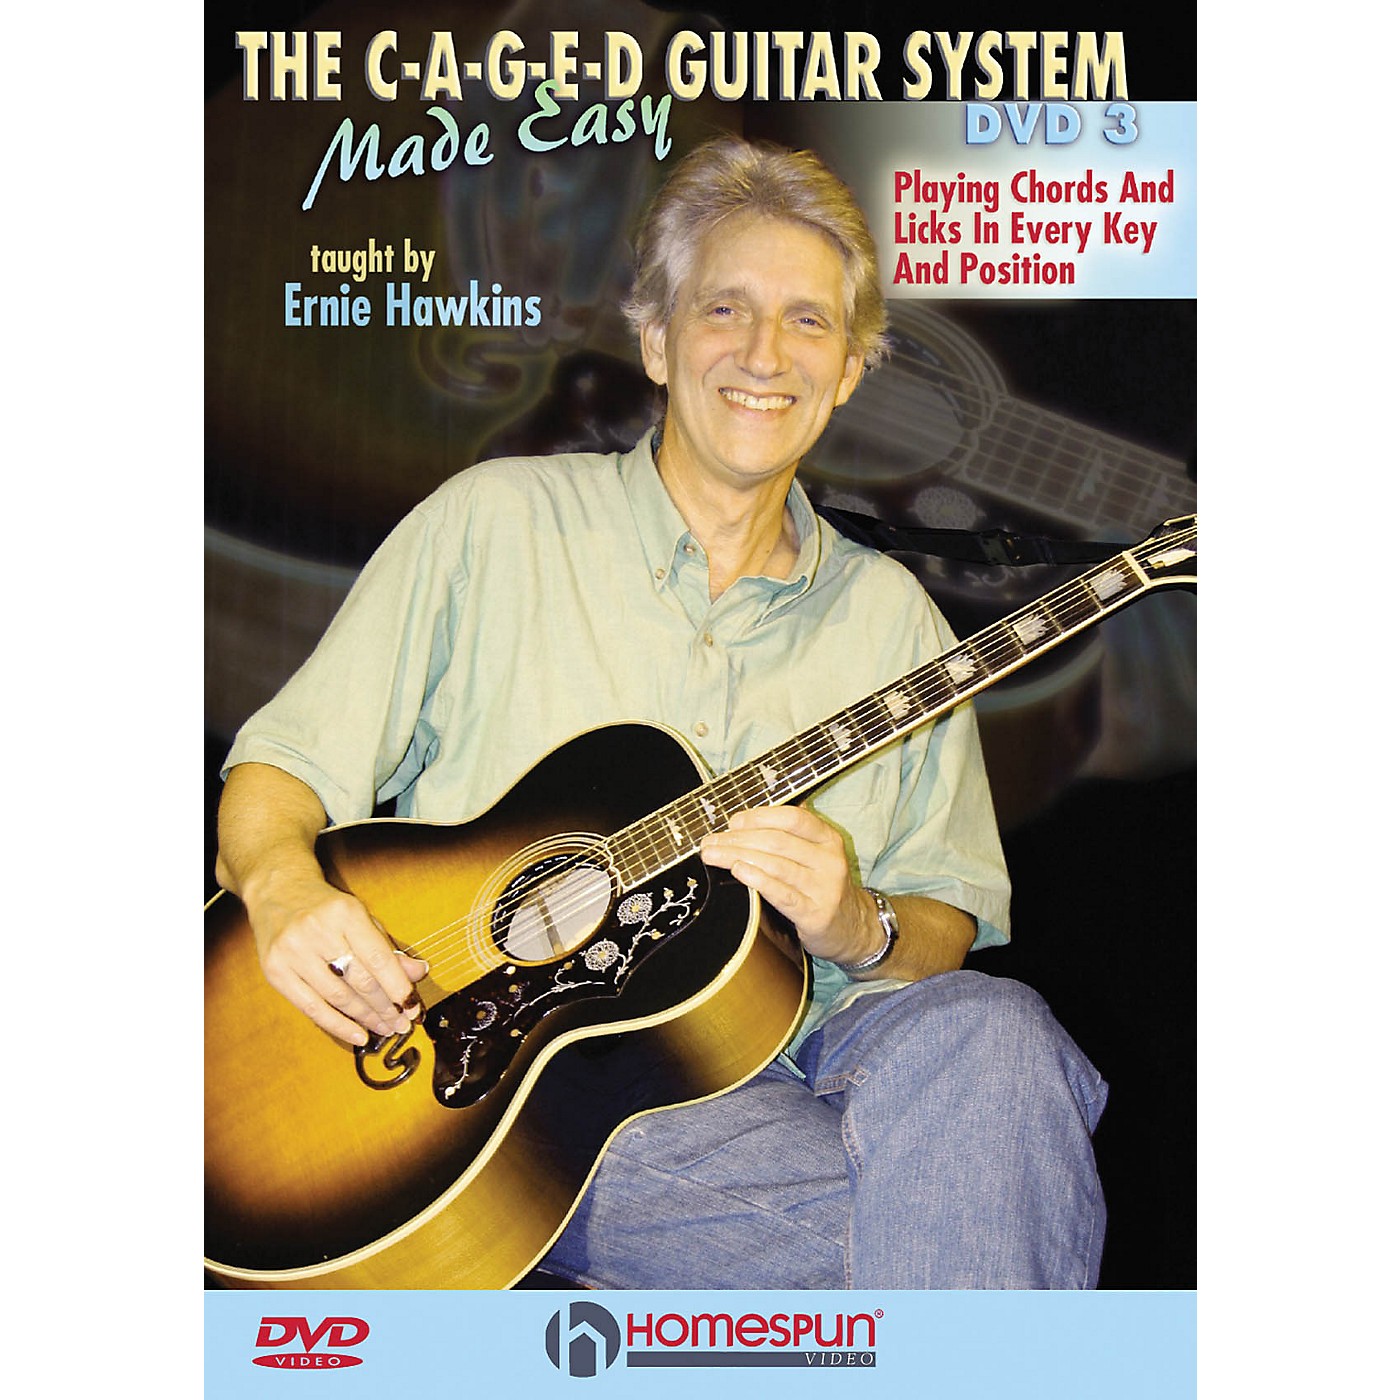 Homespun The C-A-G-E-D Guitar System Made Easy Instructional/Guitar/DVD Series DVD Performed by Ernie Hawkins thumbnail